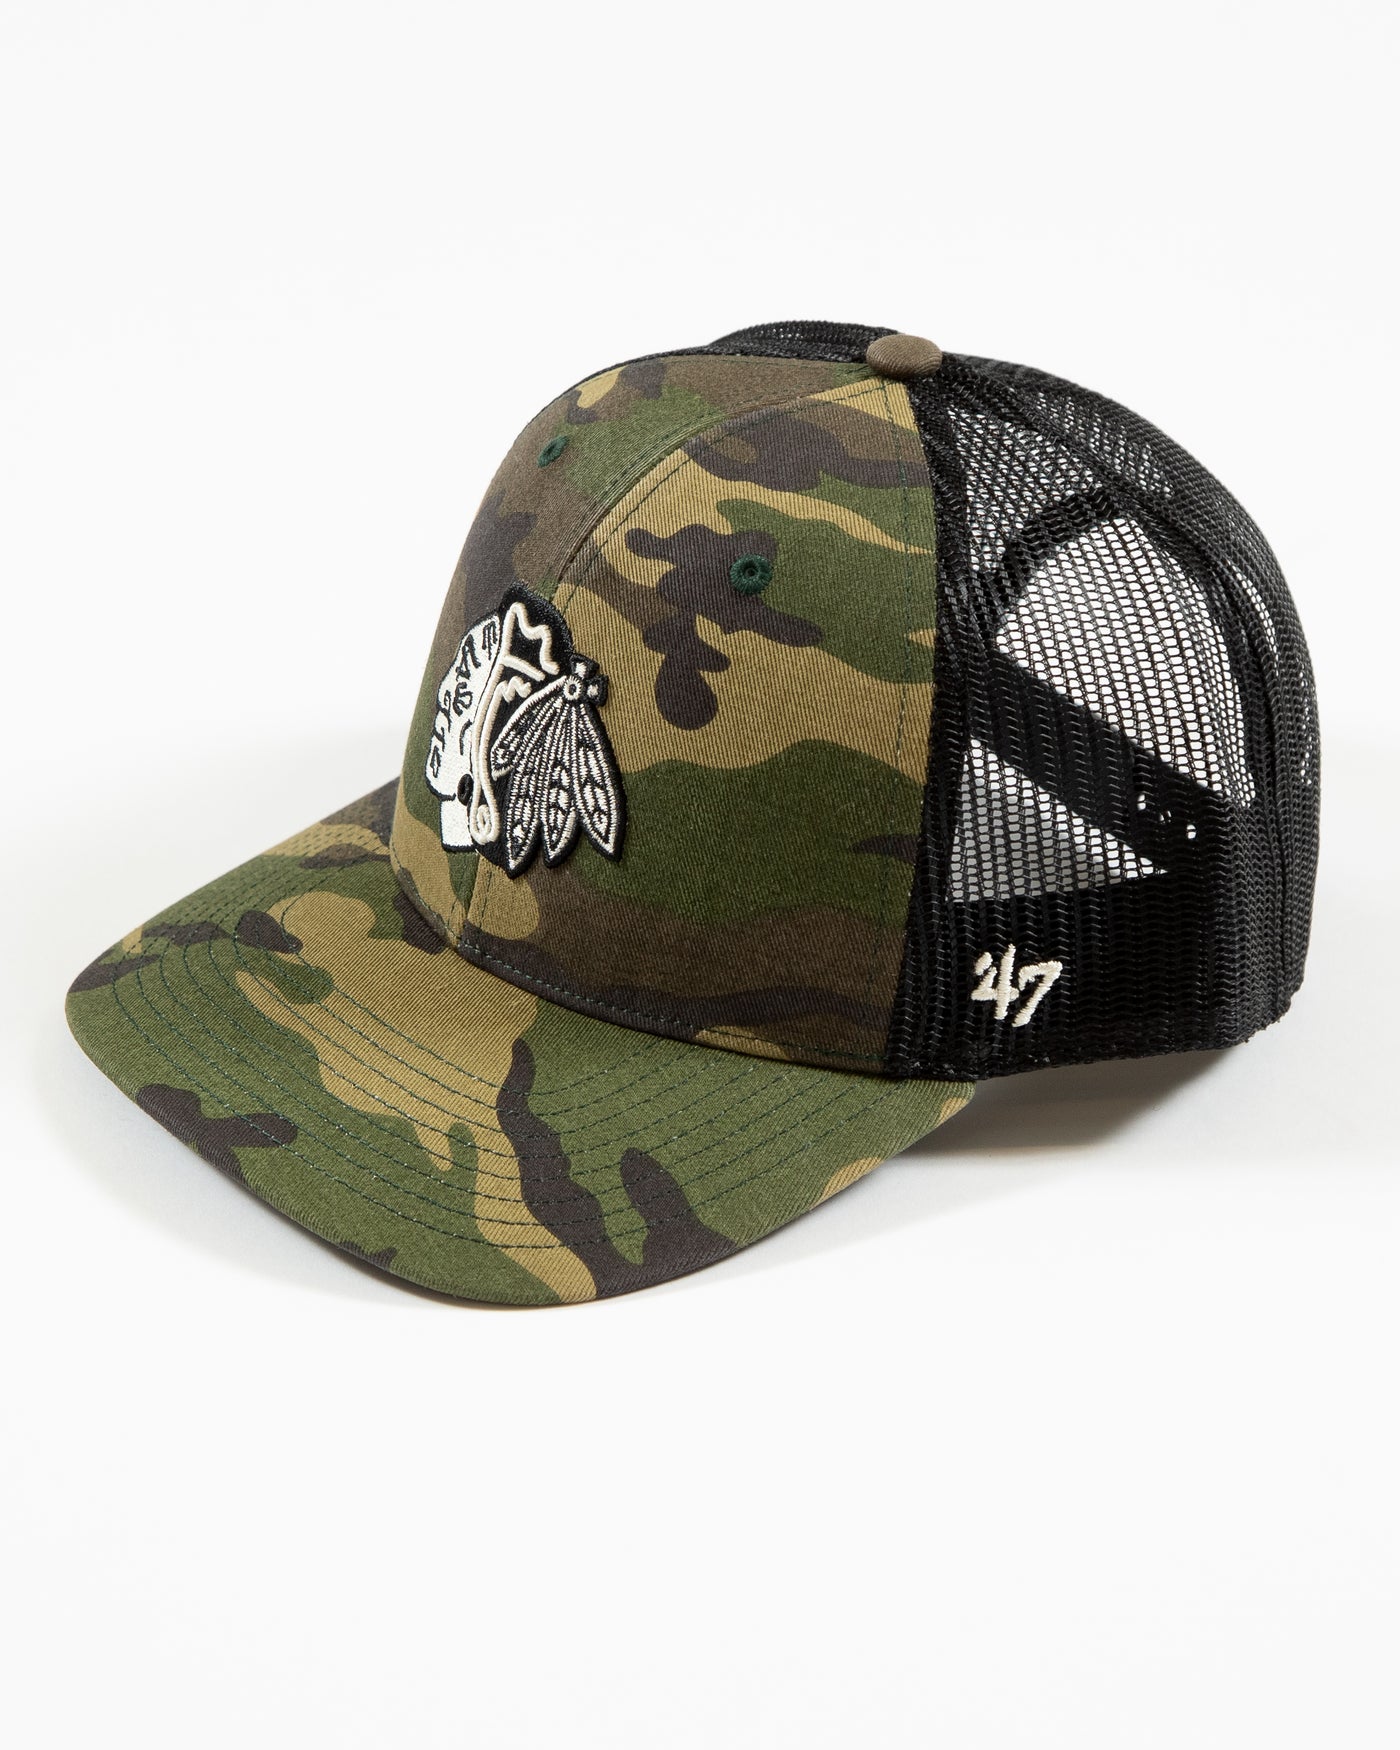 '47 brand camouflage adjustable trucker with Chicago Blackhawks primary logo embroidered on front - left side angle lay flat